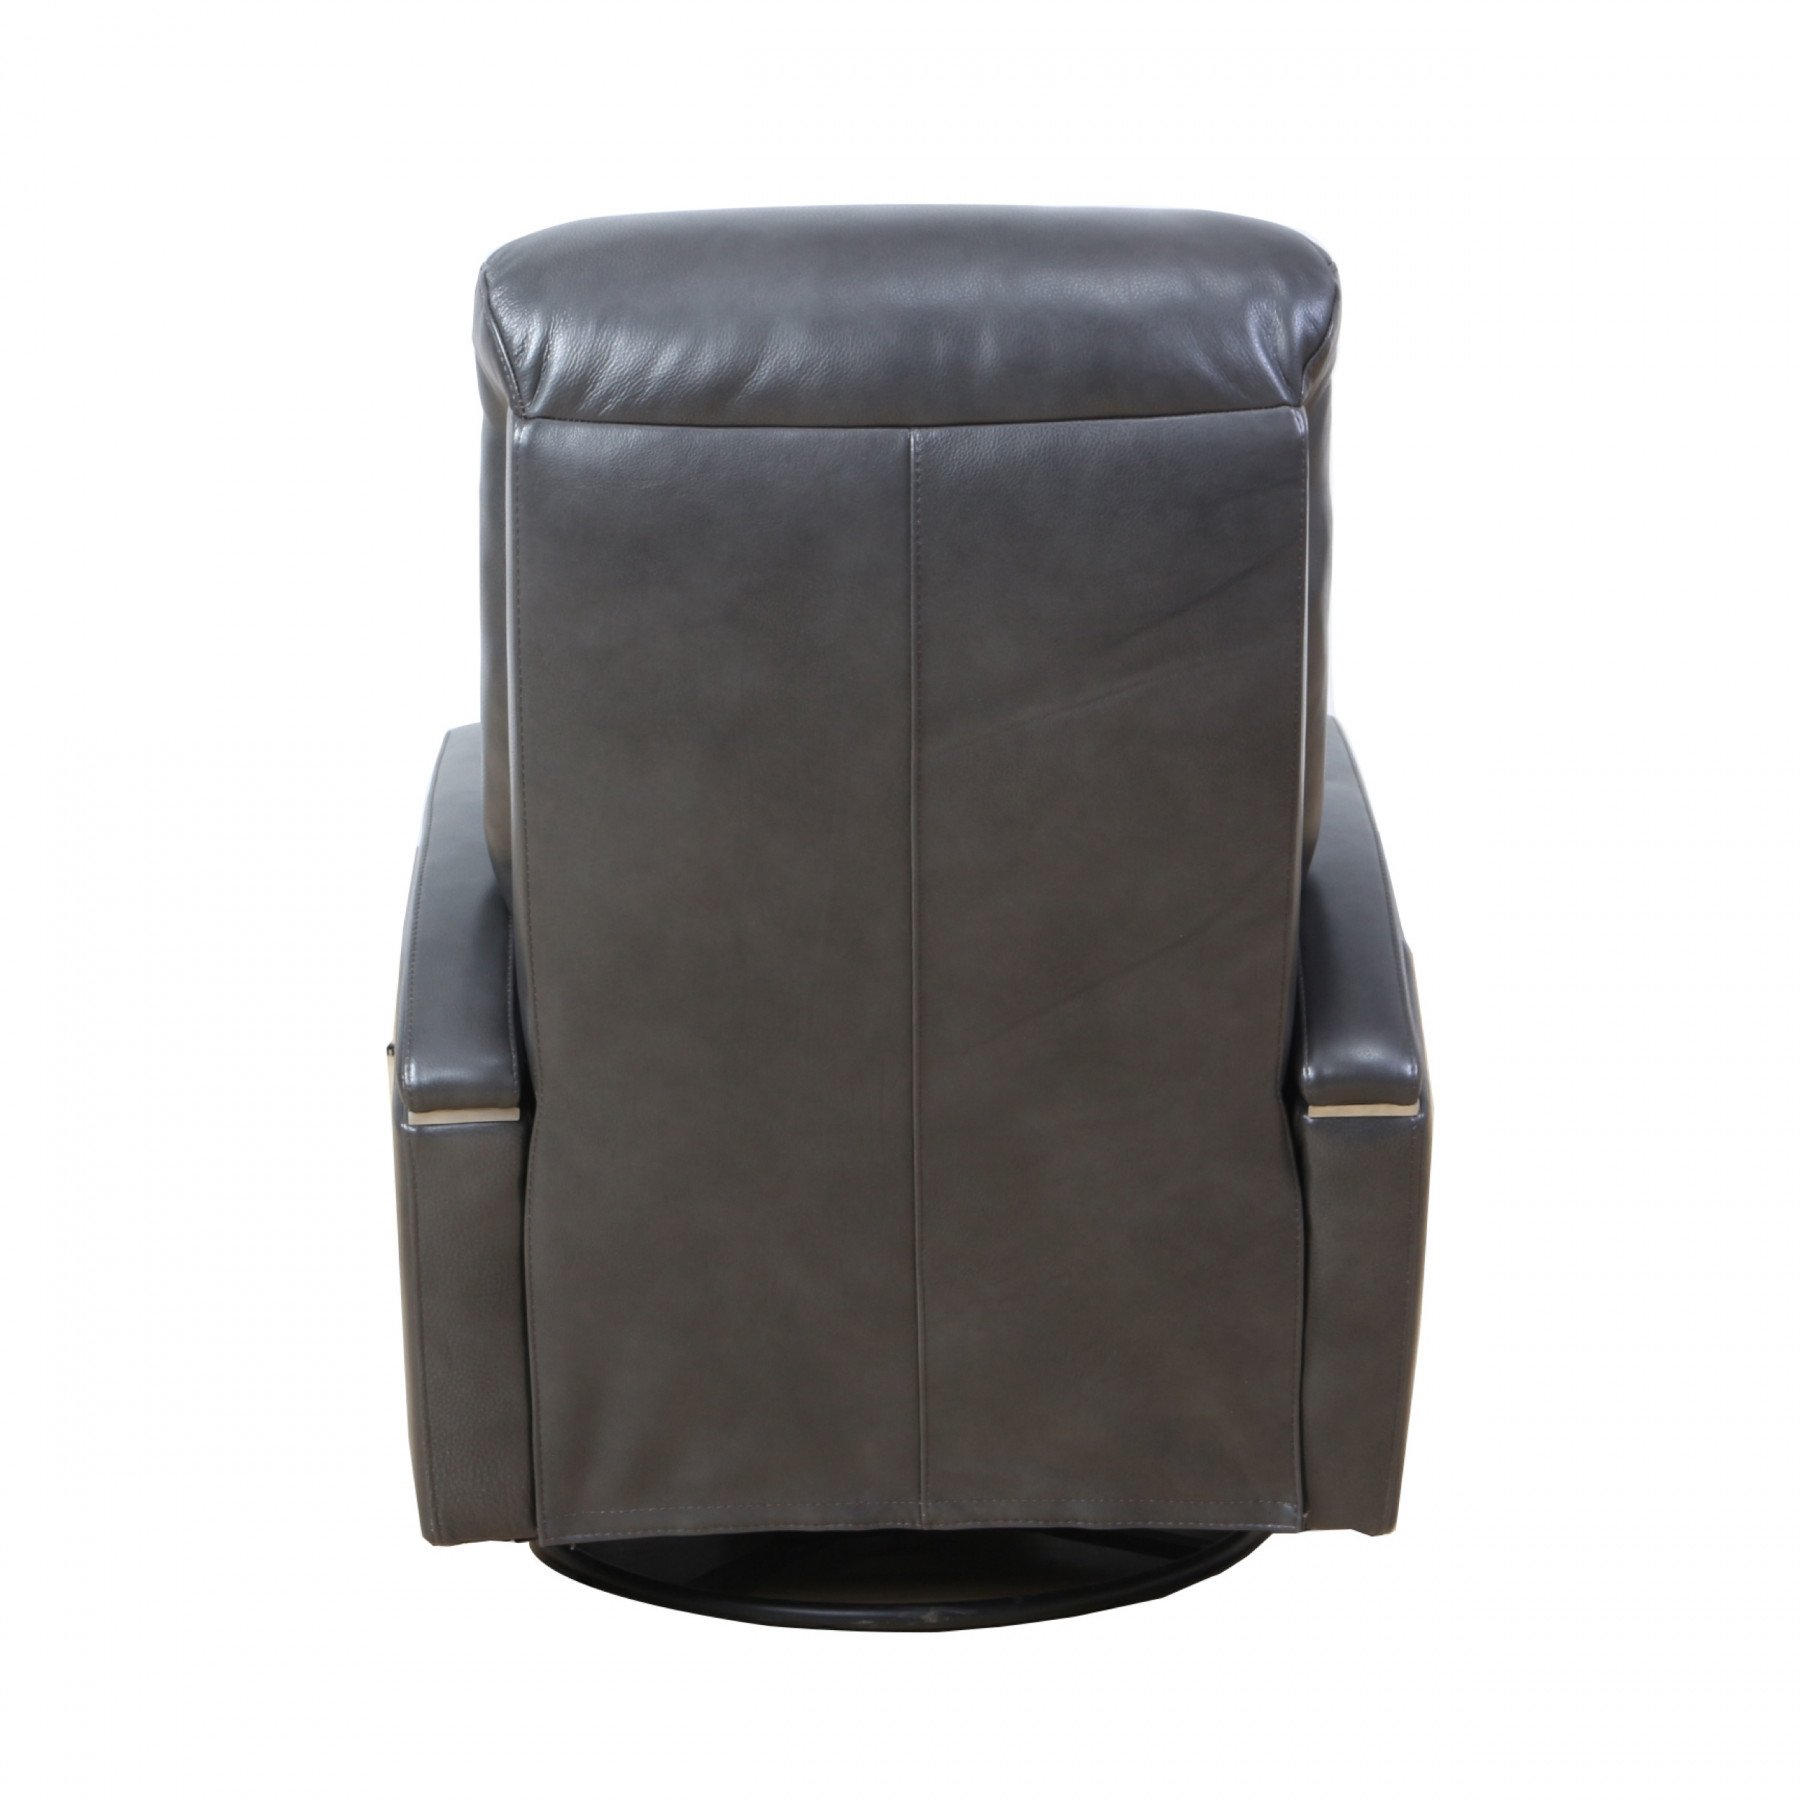 Fallon Swivel Glider Recliner in Ryegate Gray by BarcaLounger